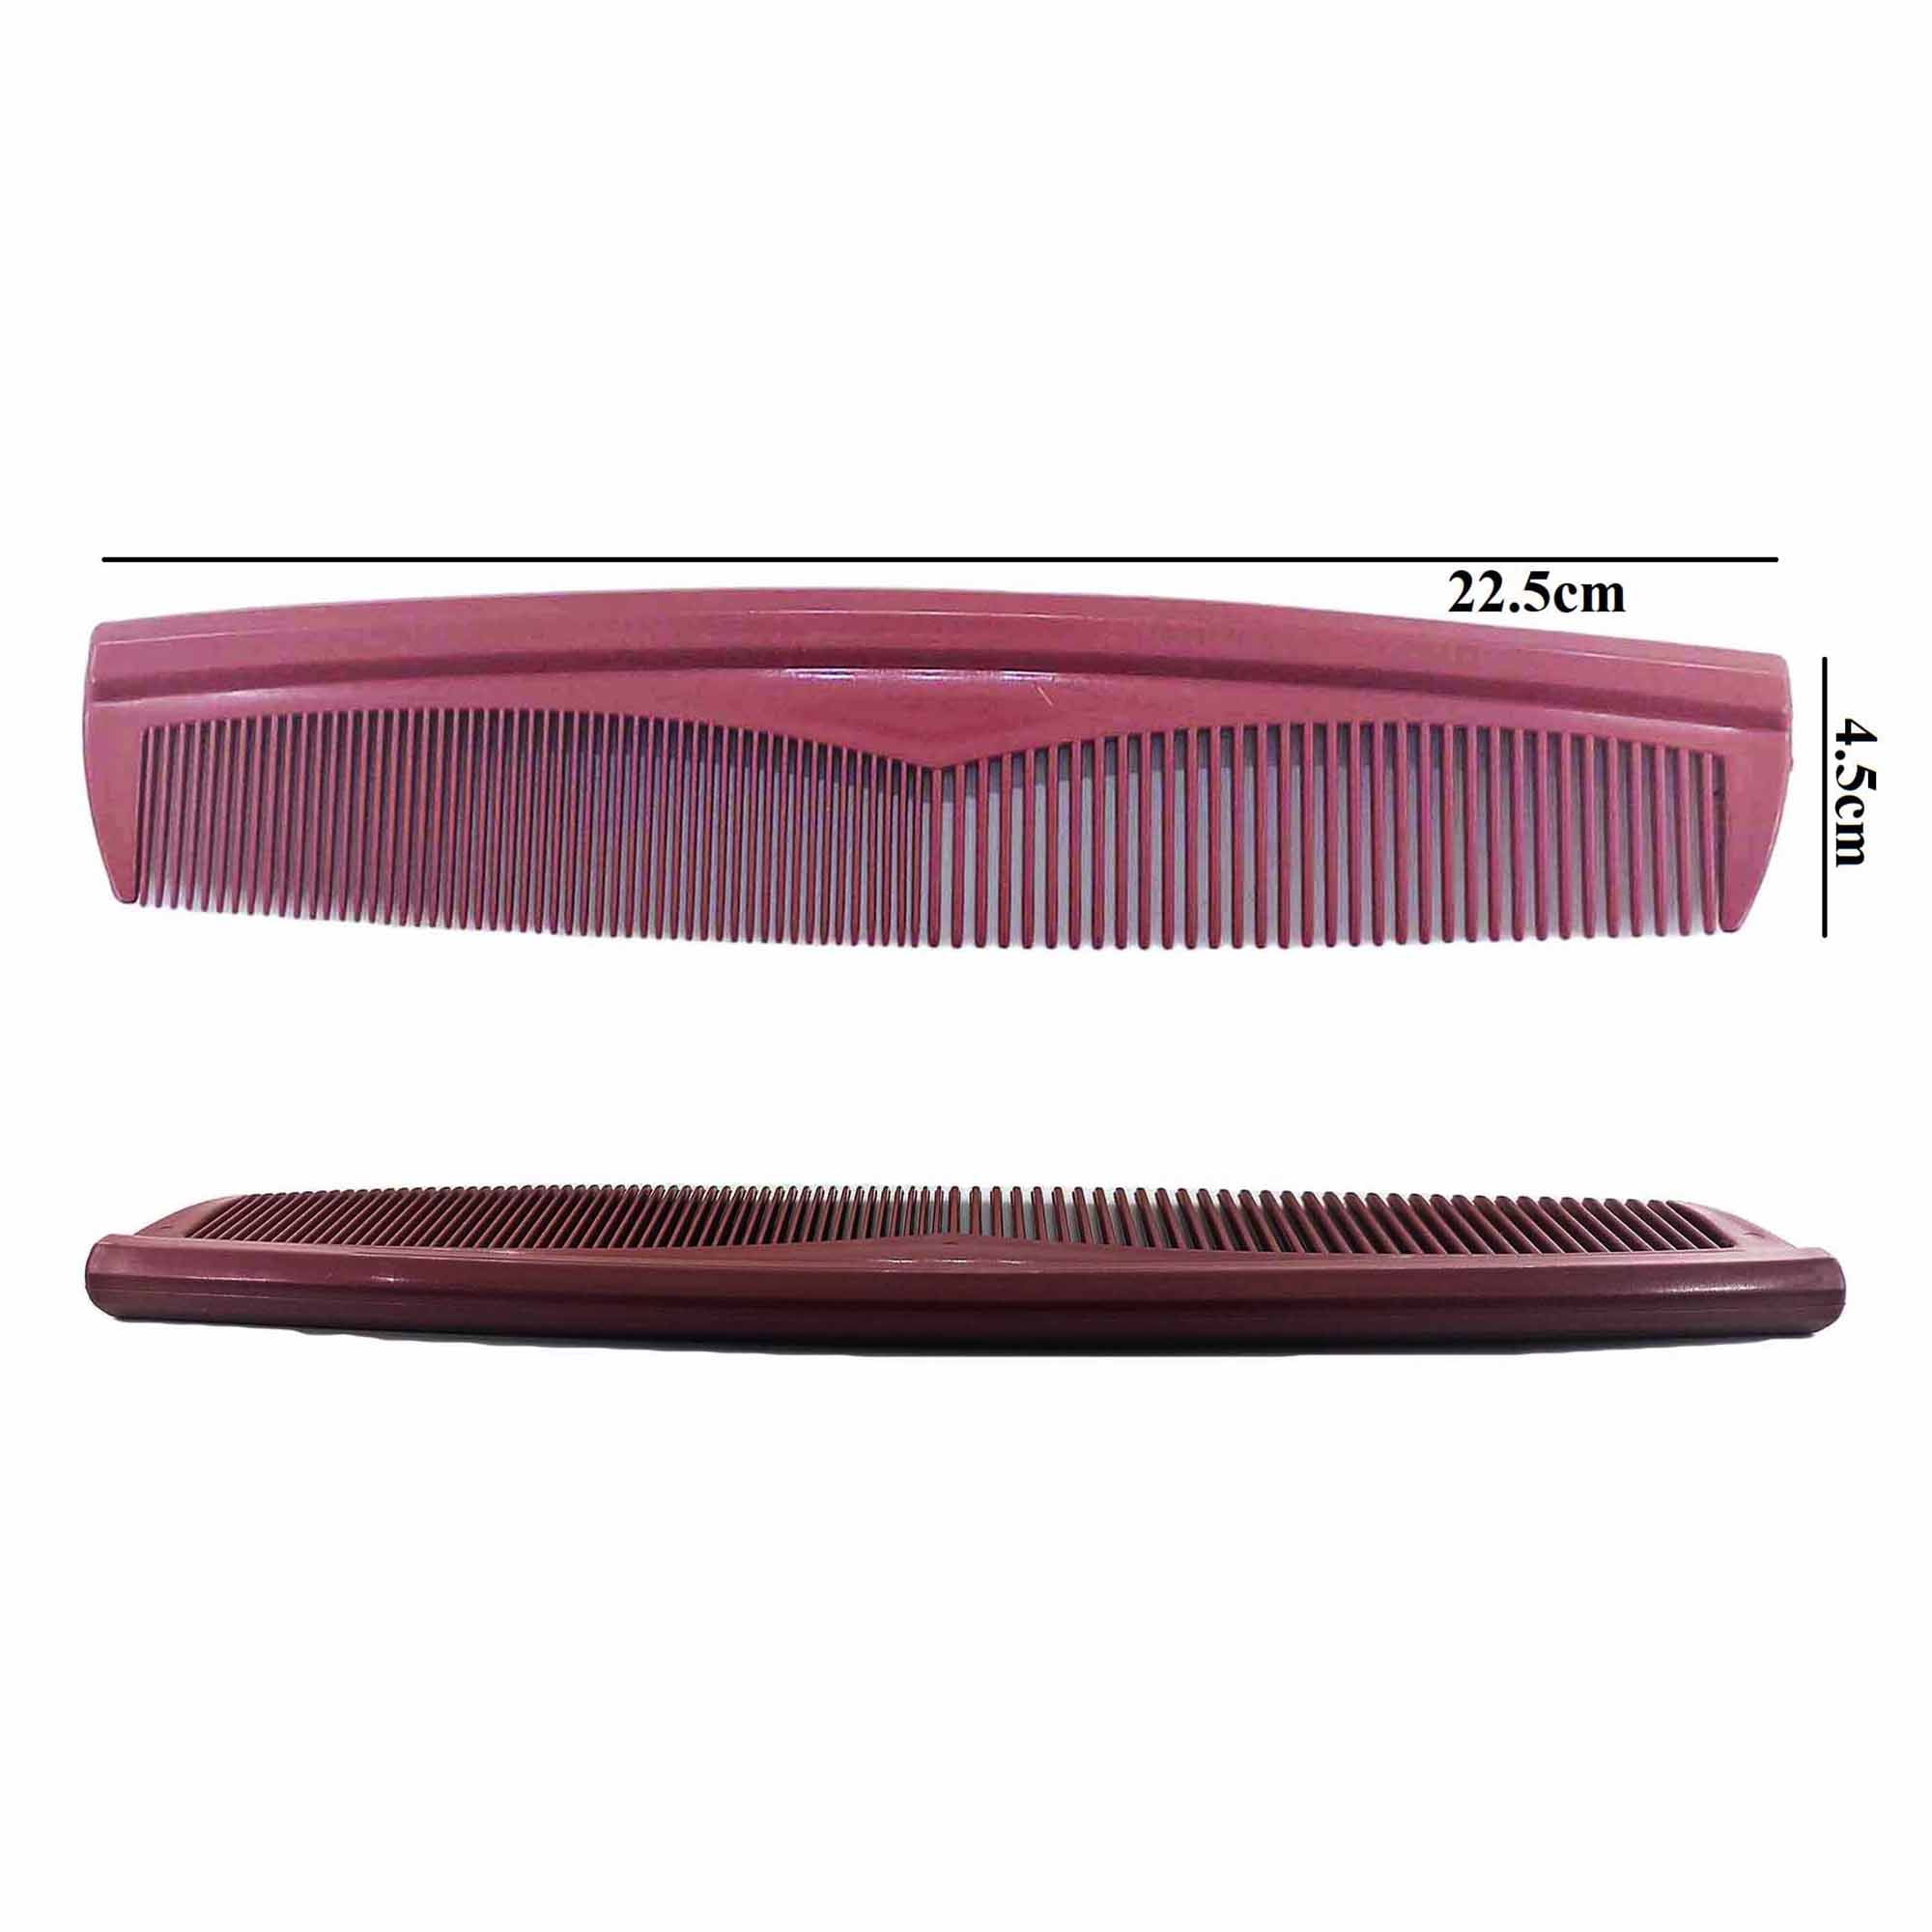 Regular use Classic Horn Plastic Hair Combs_L Roots Brown Fine Teeth Comb For Fine long Straight Hair